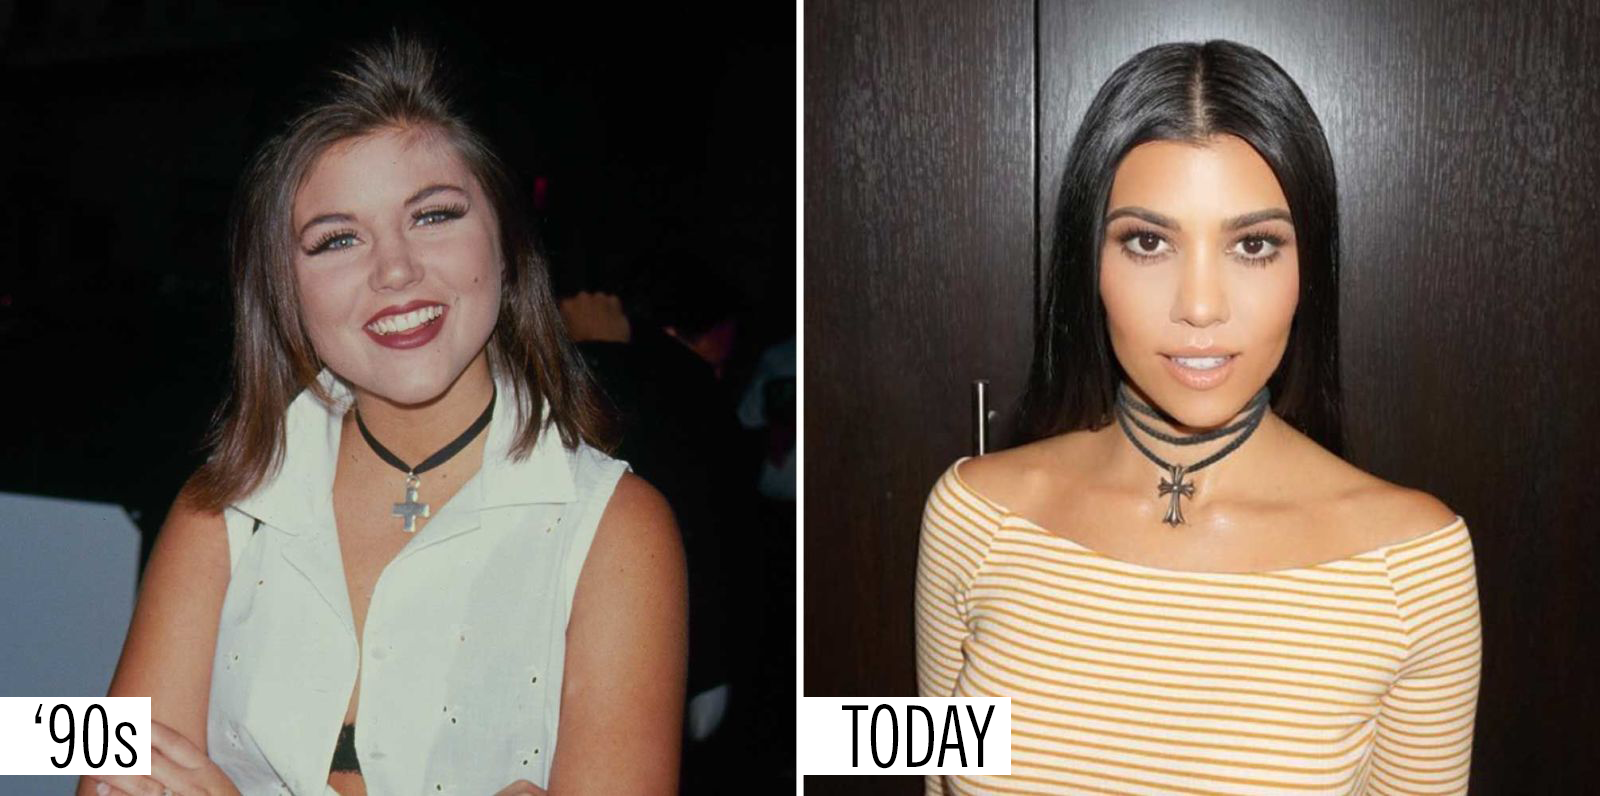 50 Jewelry Styles from the '90s - Chokers, Earrings, Arm-Bands and More